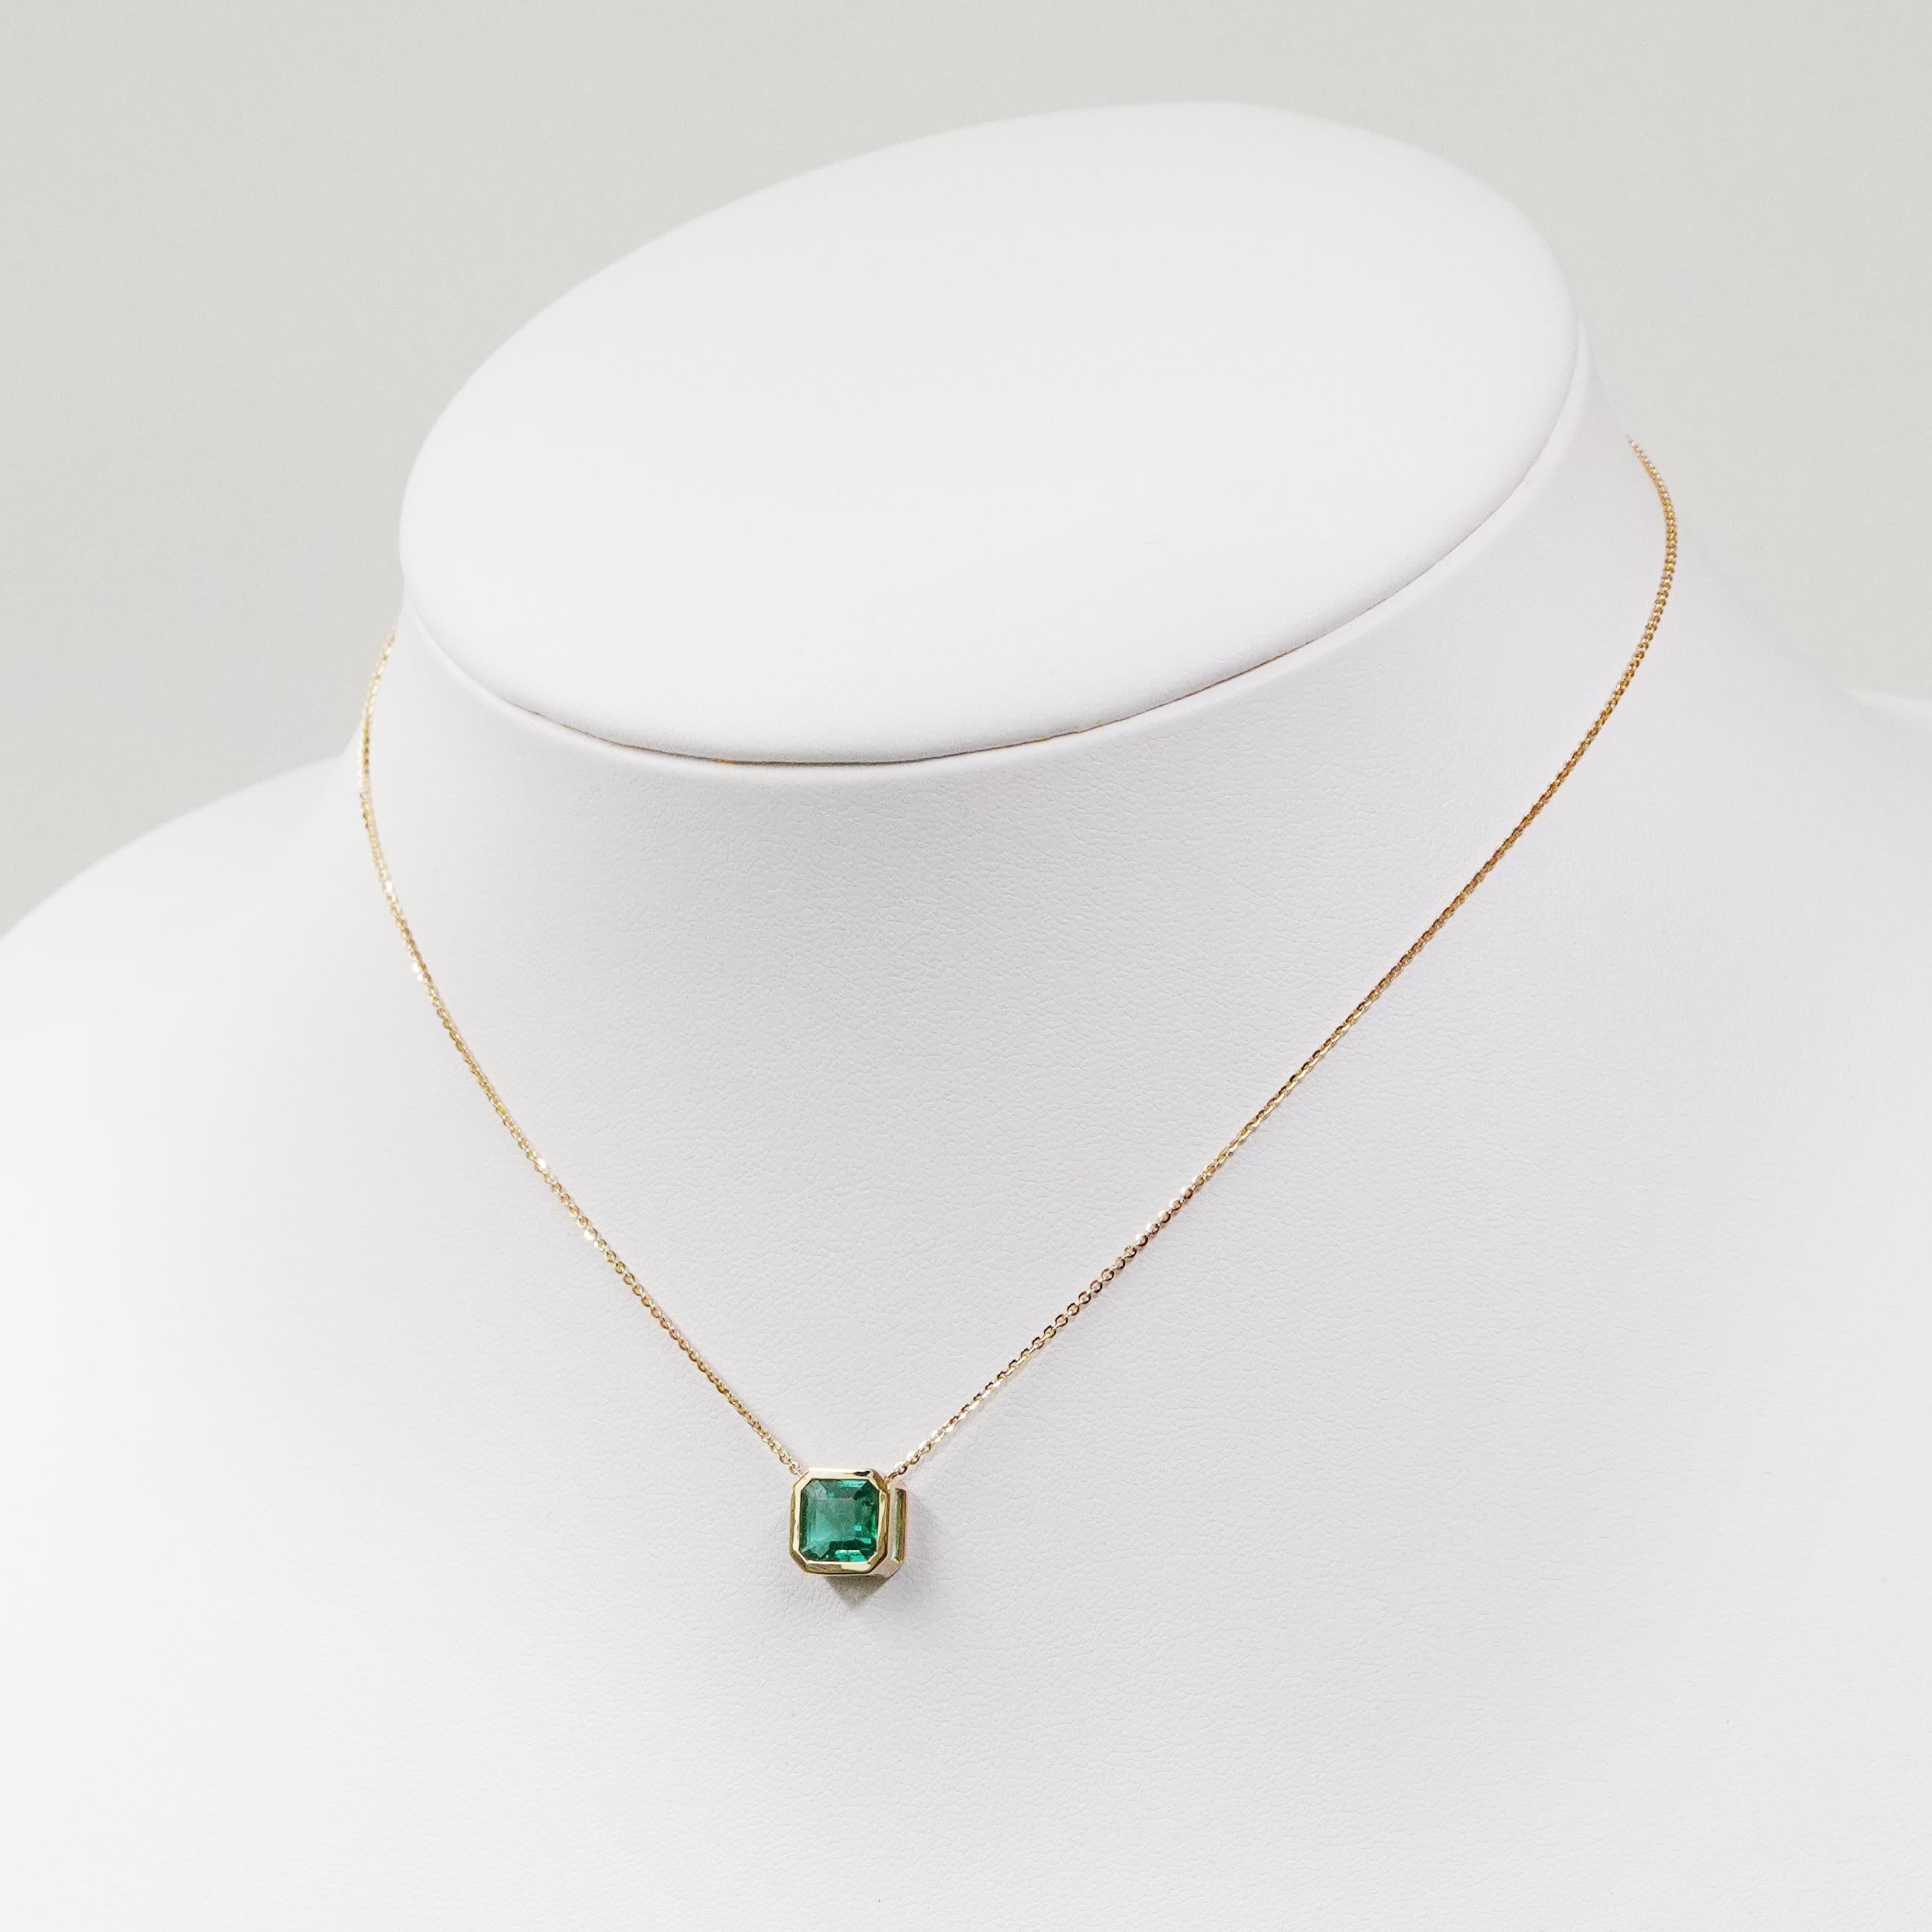 Octagon Cut 18K Yellow Gold Necklace With Emerald  1.17 ct. For Sale